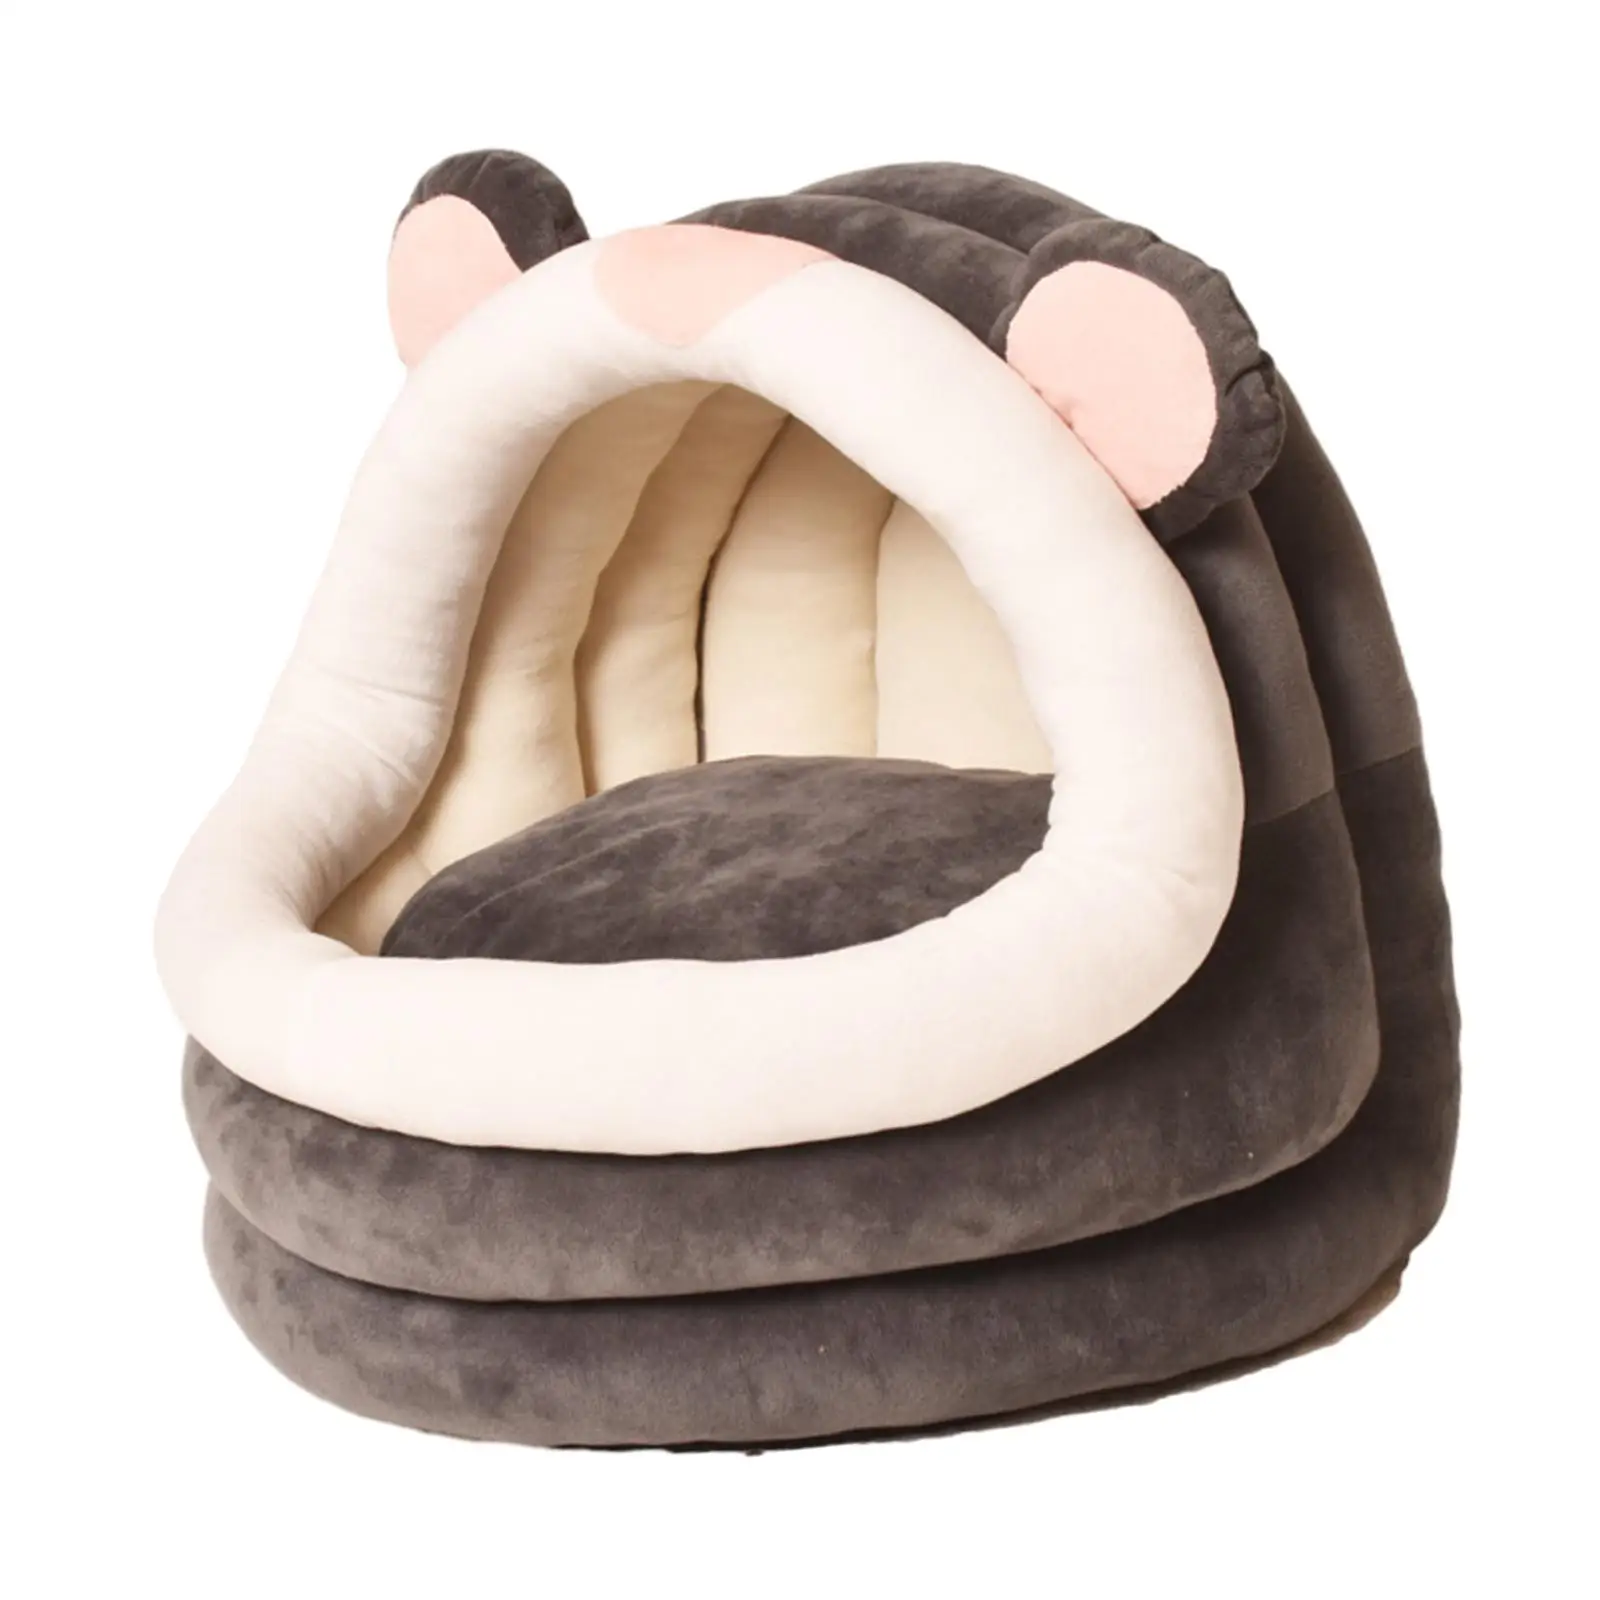 Cute Cat Bed for Indoor Semi Enclosed Soft Plush Washable Cat Nest Dog Cave Puppy Bed for Kitty Cats or Small Dogs Rabbits Puppy